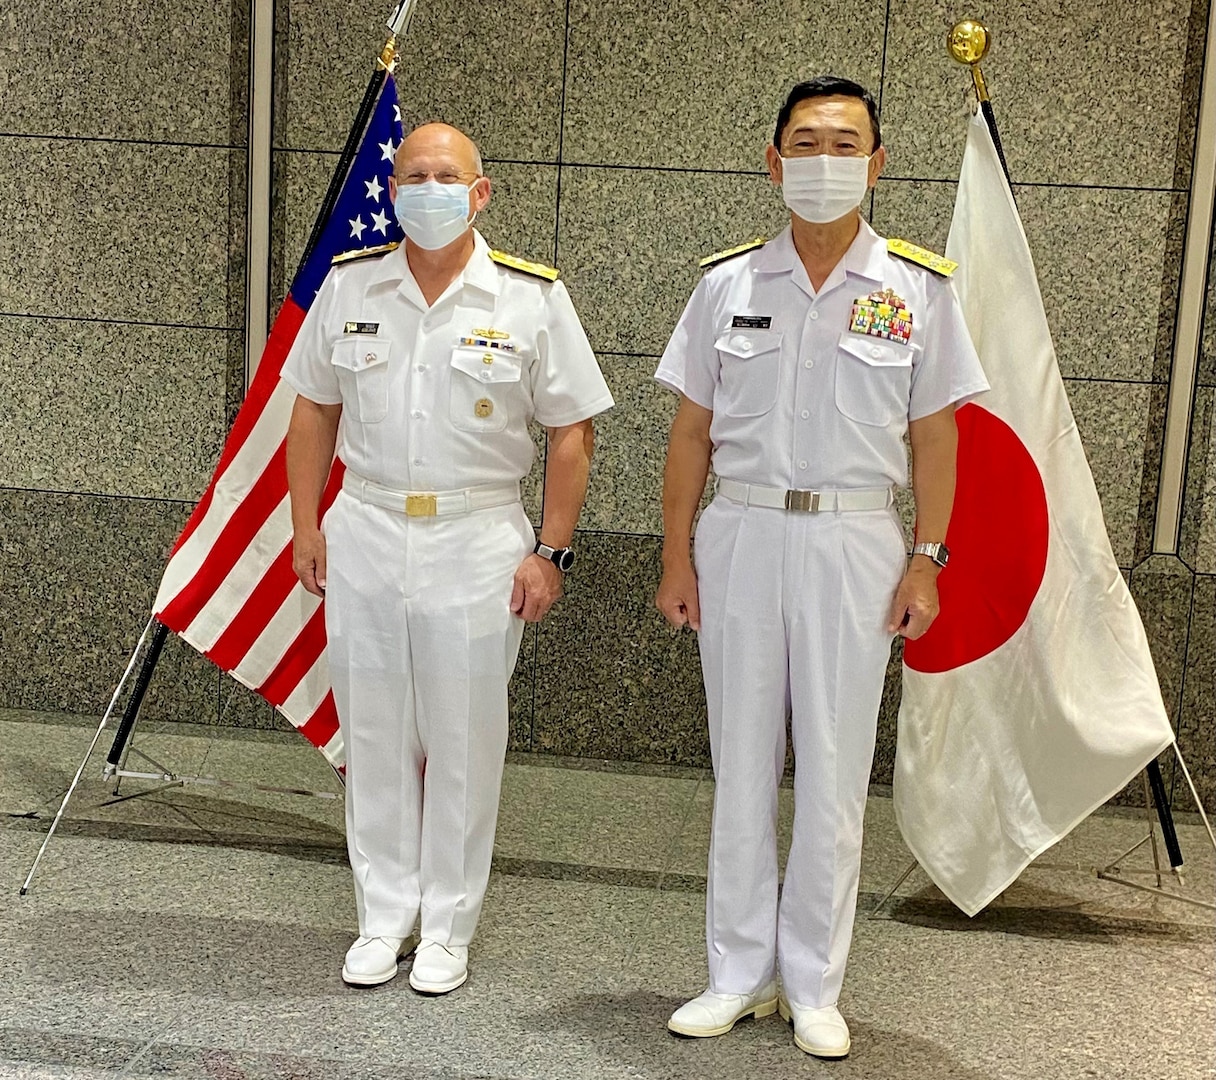 CNO Visits Tokyo, Meets With Senior Japanese Leaders